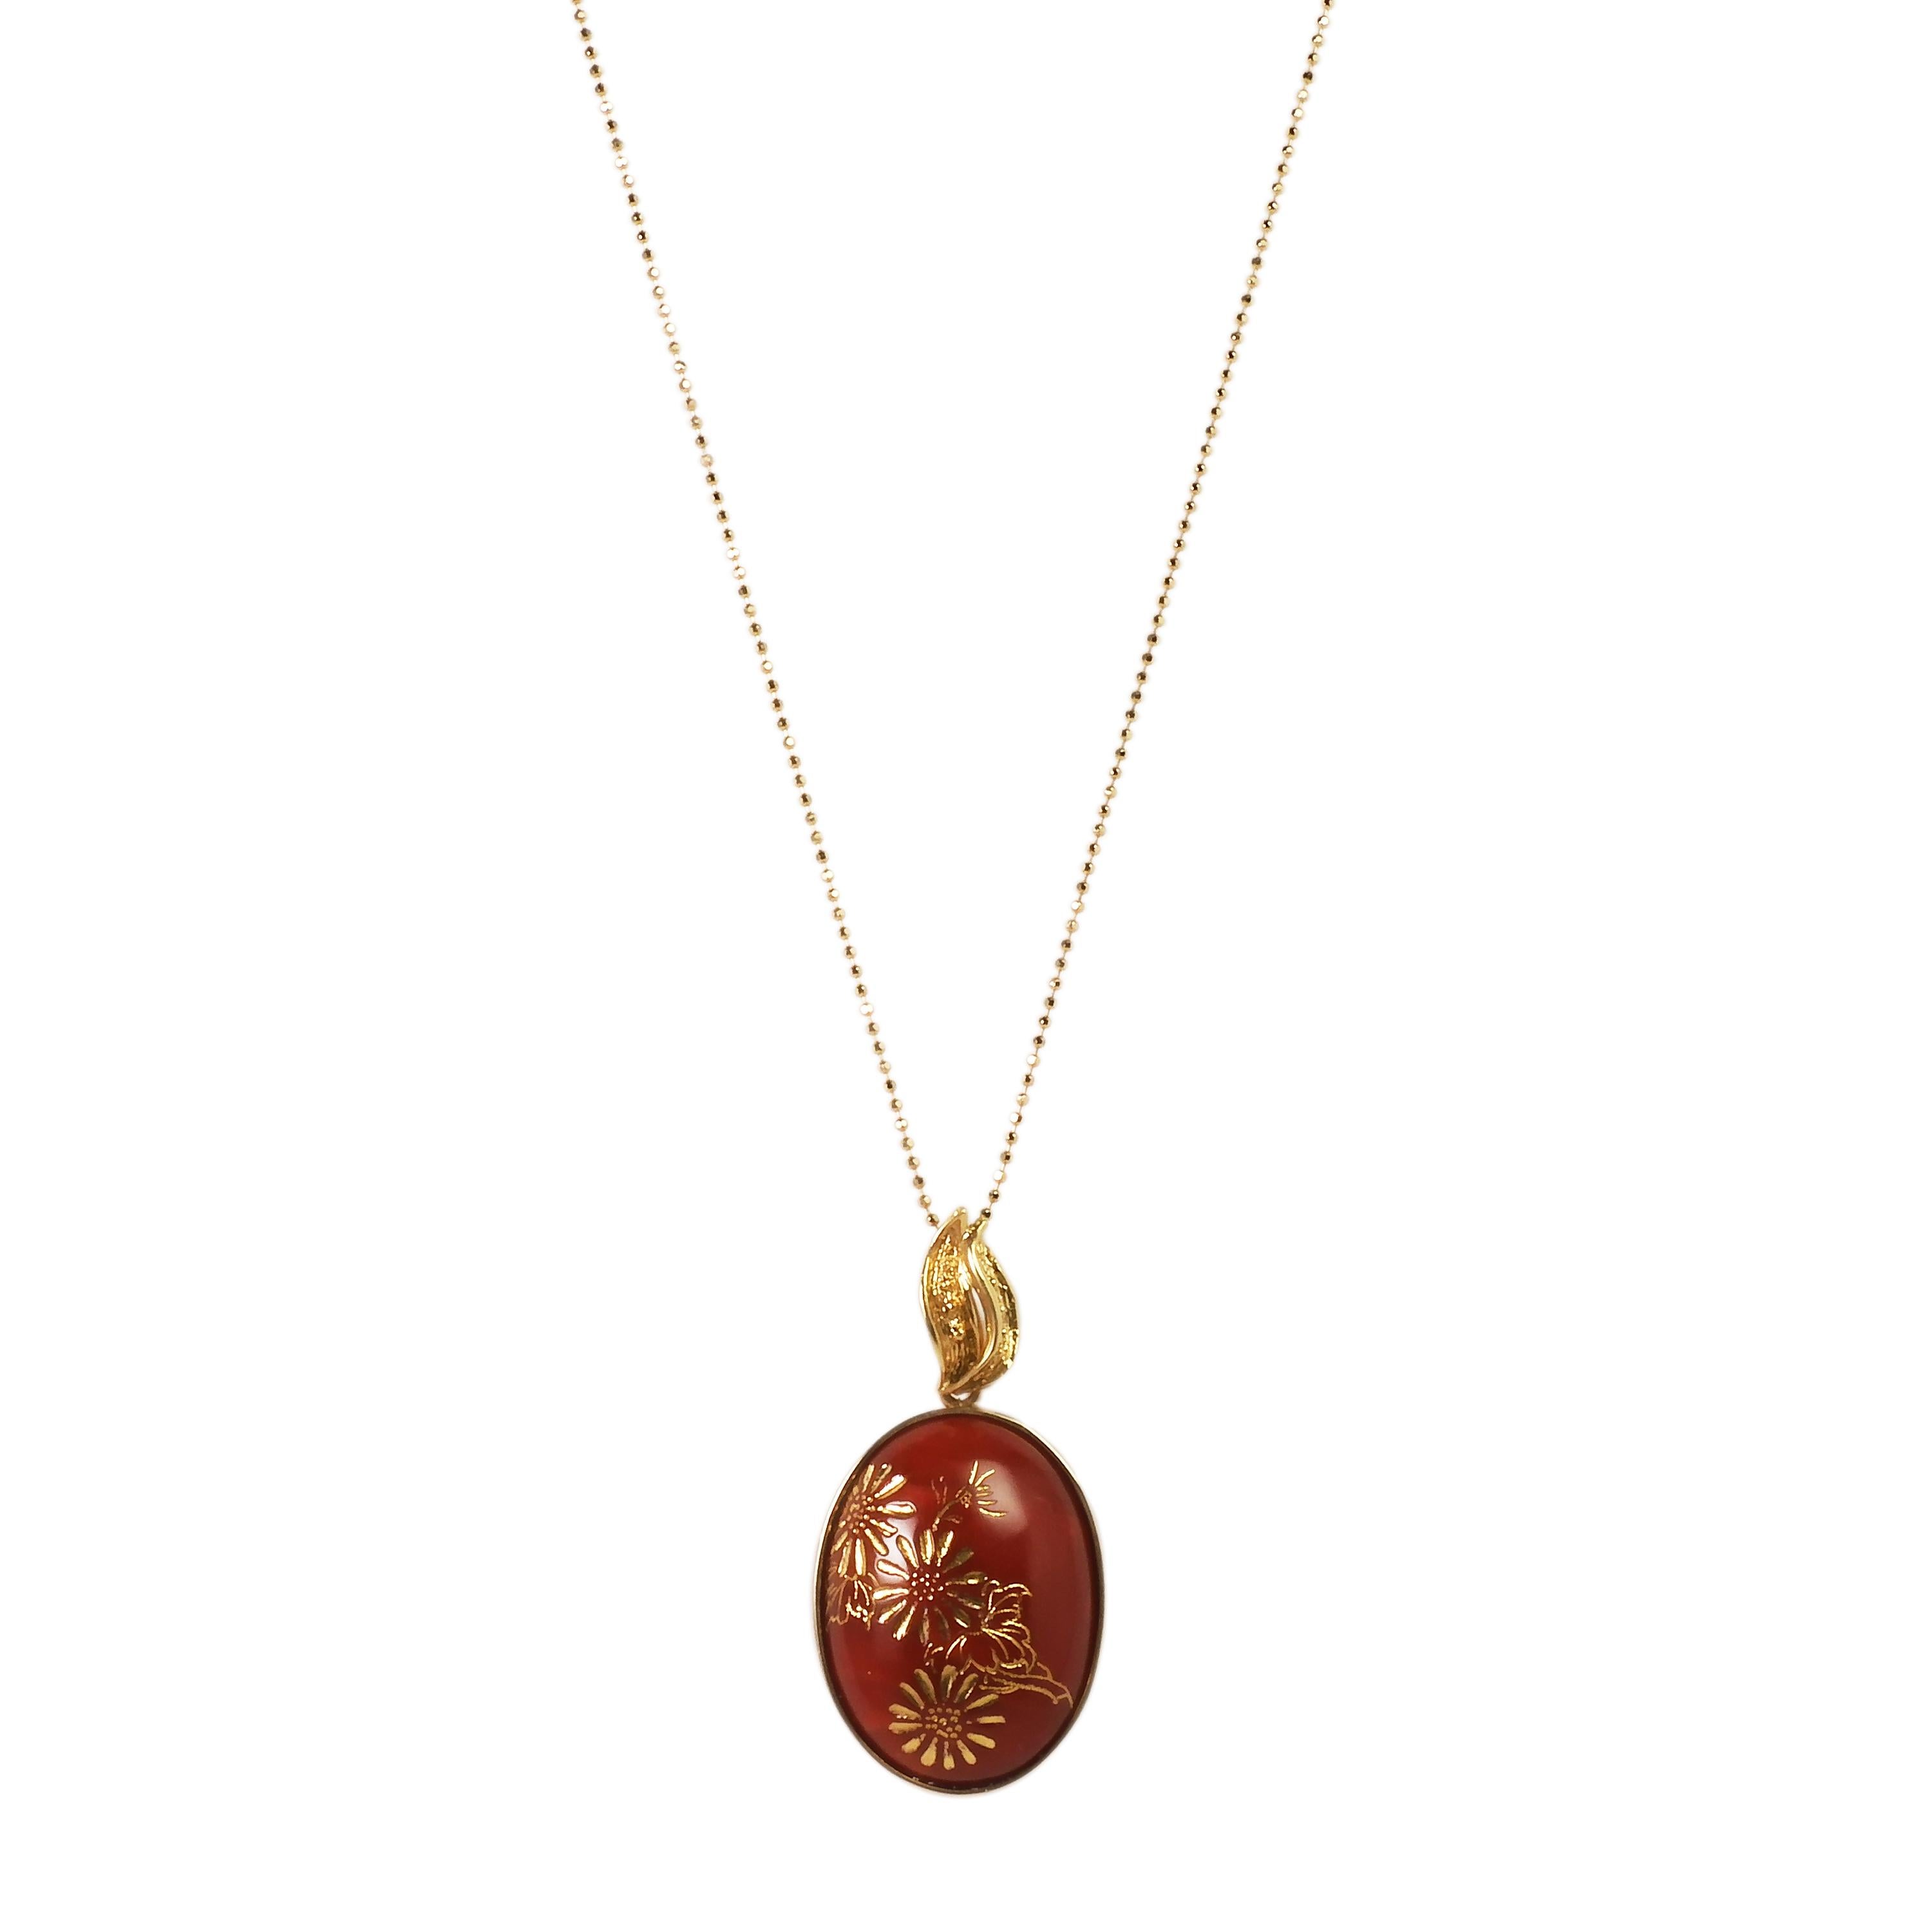 This is a classic Chiaka Sango (Oxblood Coral) pendant with a chrysanthemum engraving. There is no white spot on the surface and the color is the typical deep dark red of the oxblood coral. The petals and leaves of the chrysanthemum have been carved